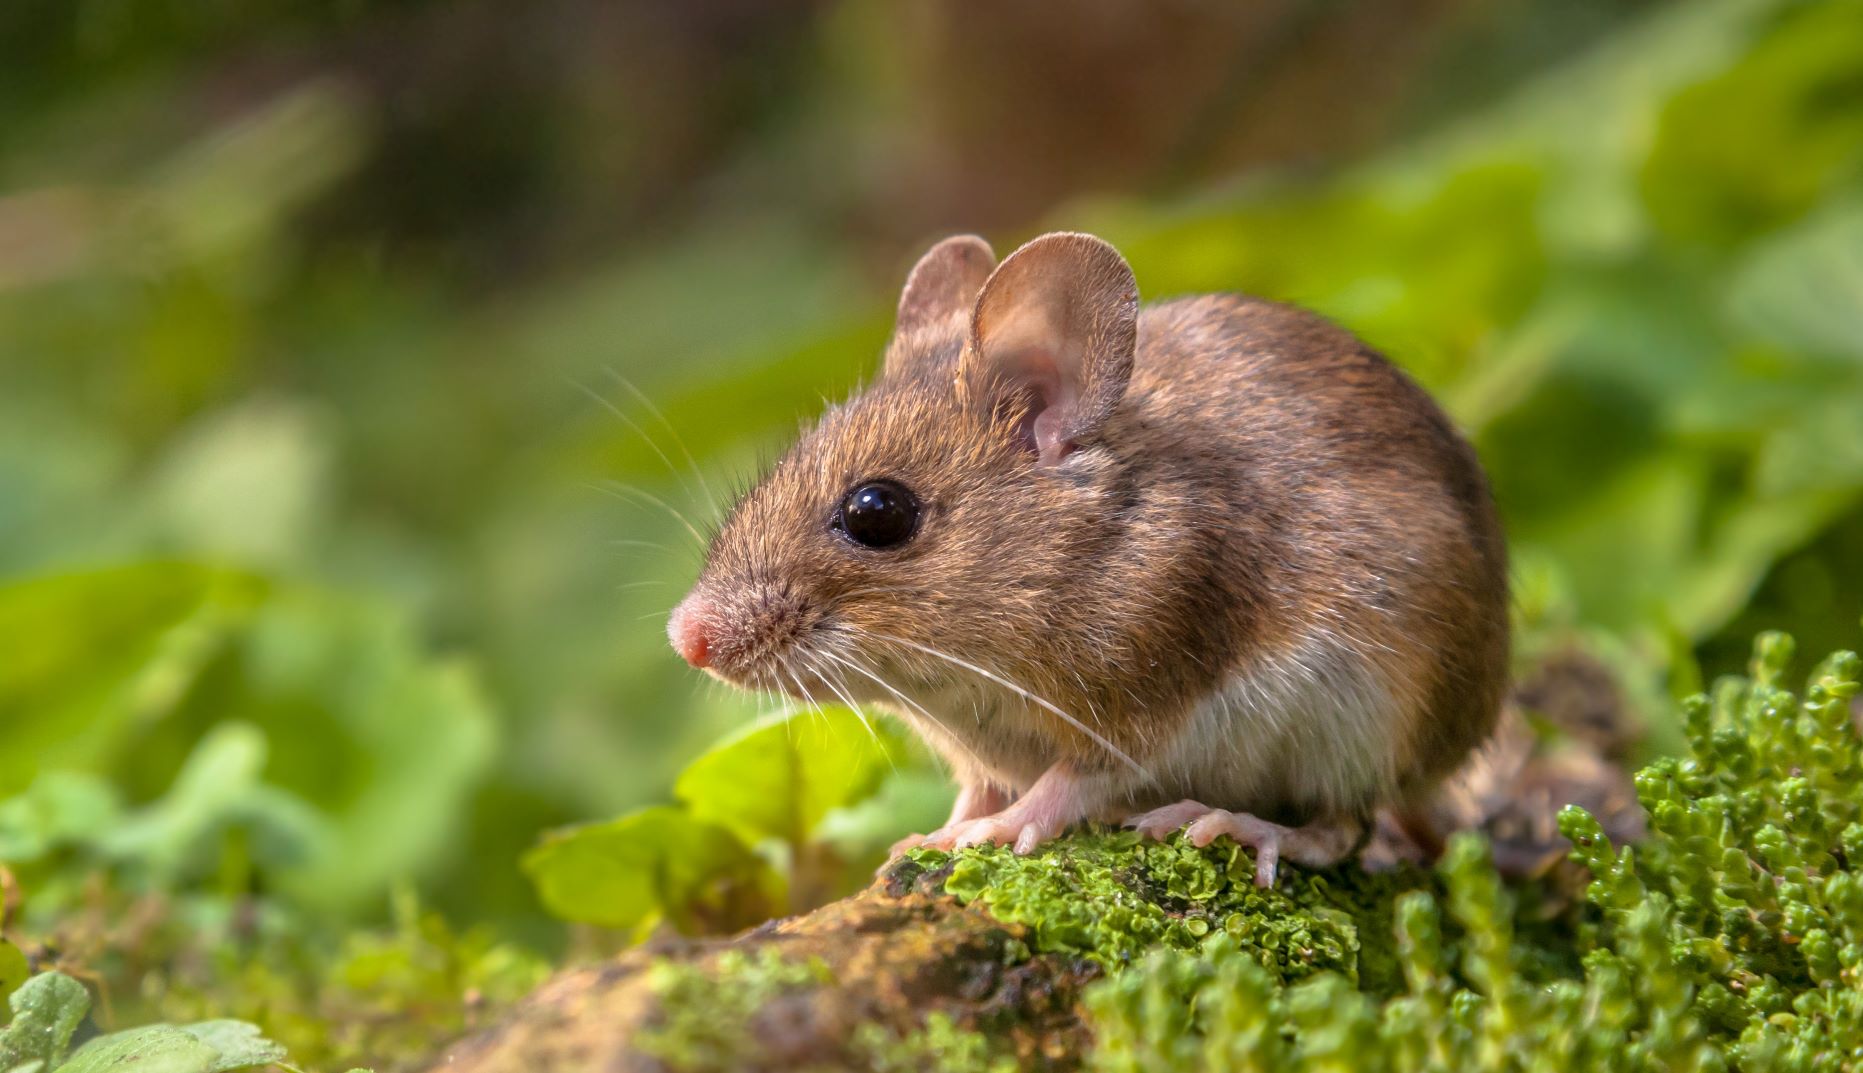 Close up shot of a wood mouse resting in some greenery